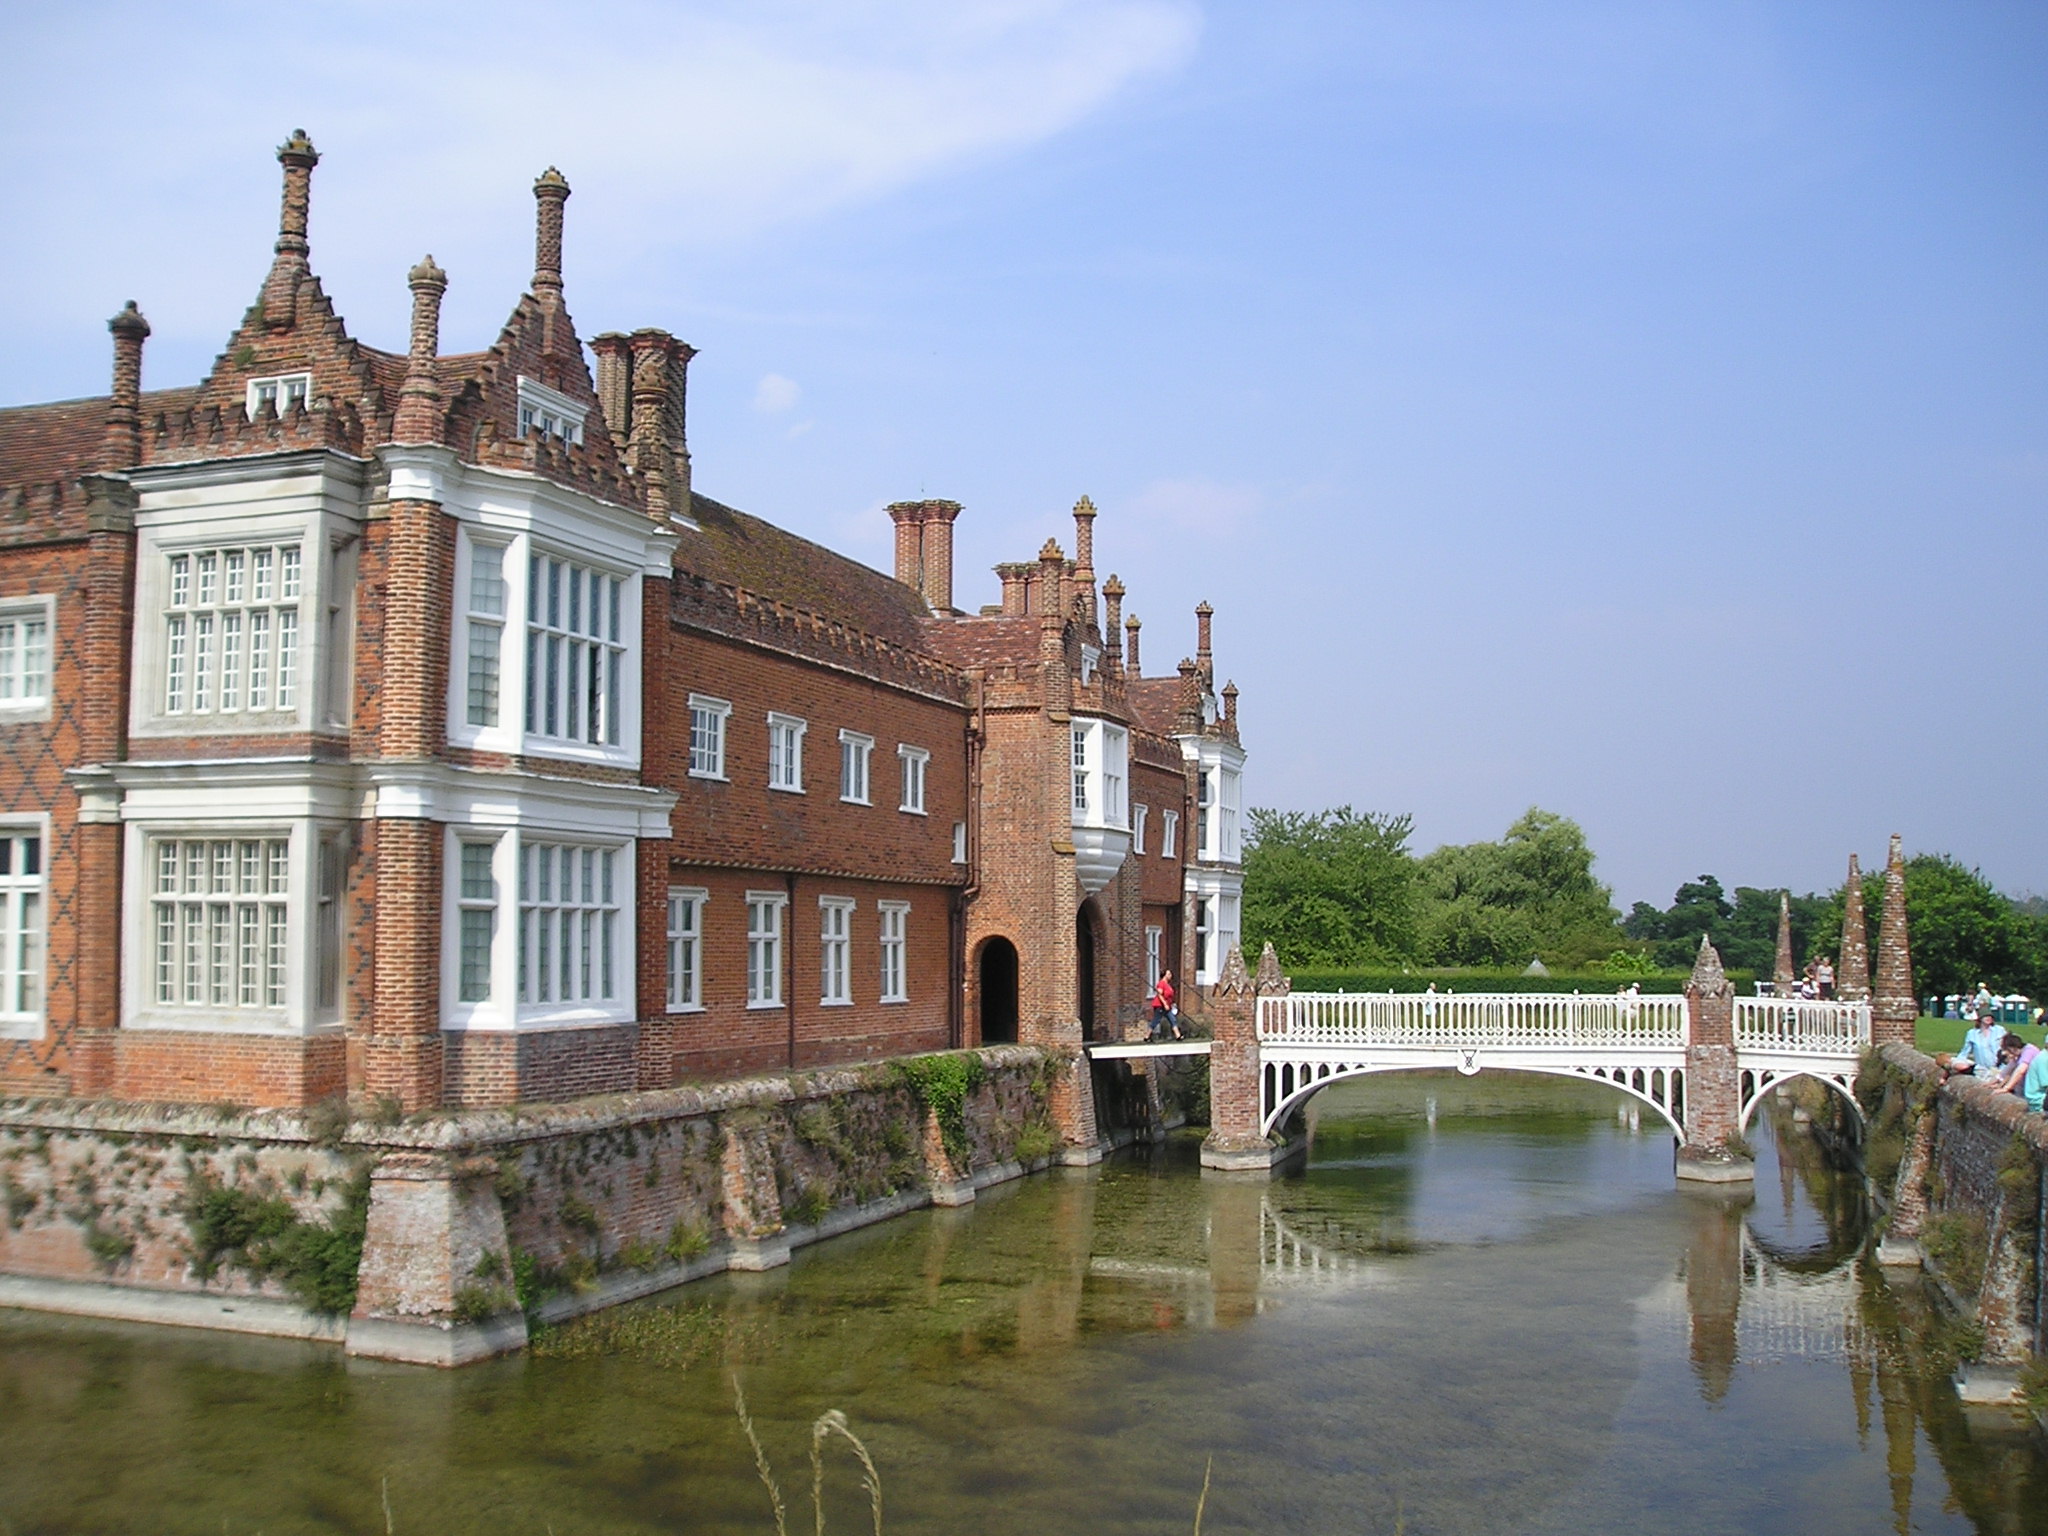 Helmingham Hall and its moat